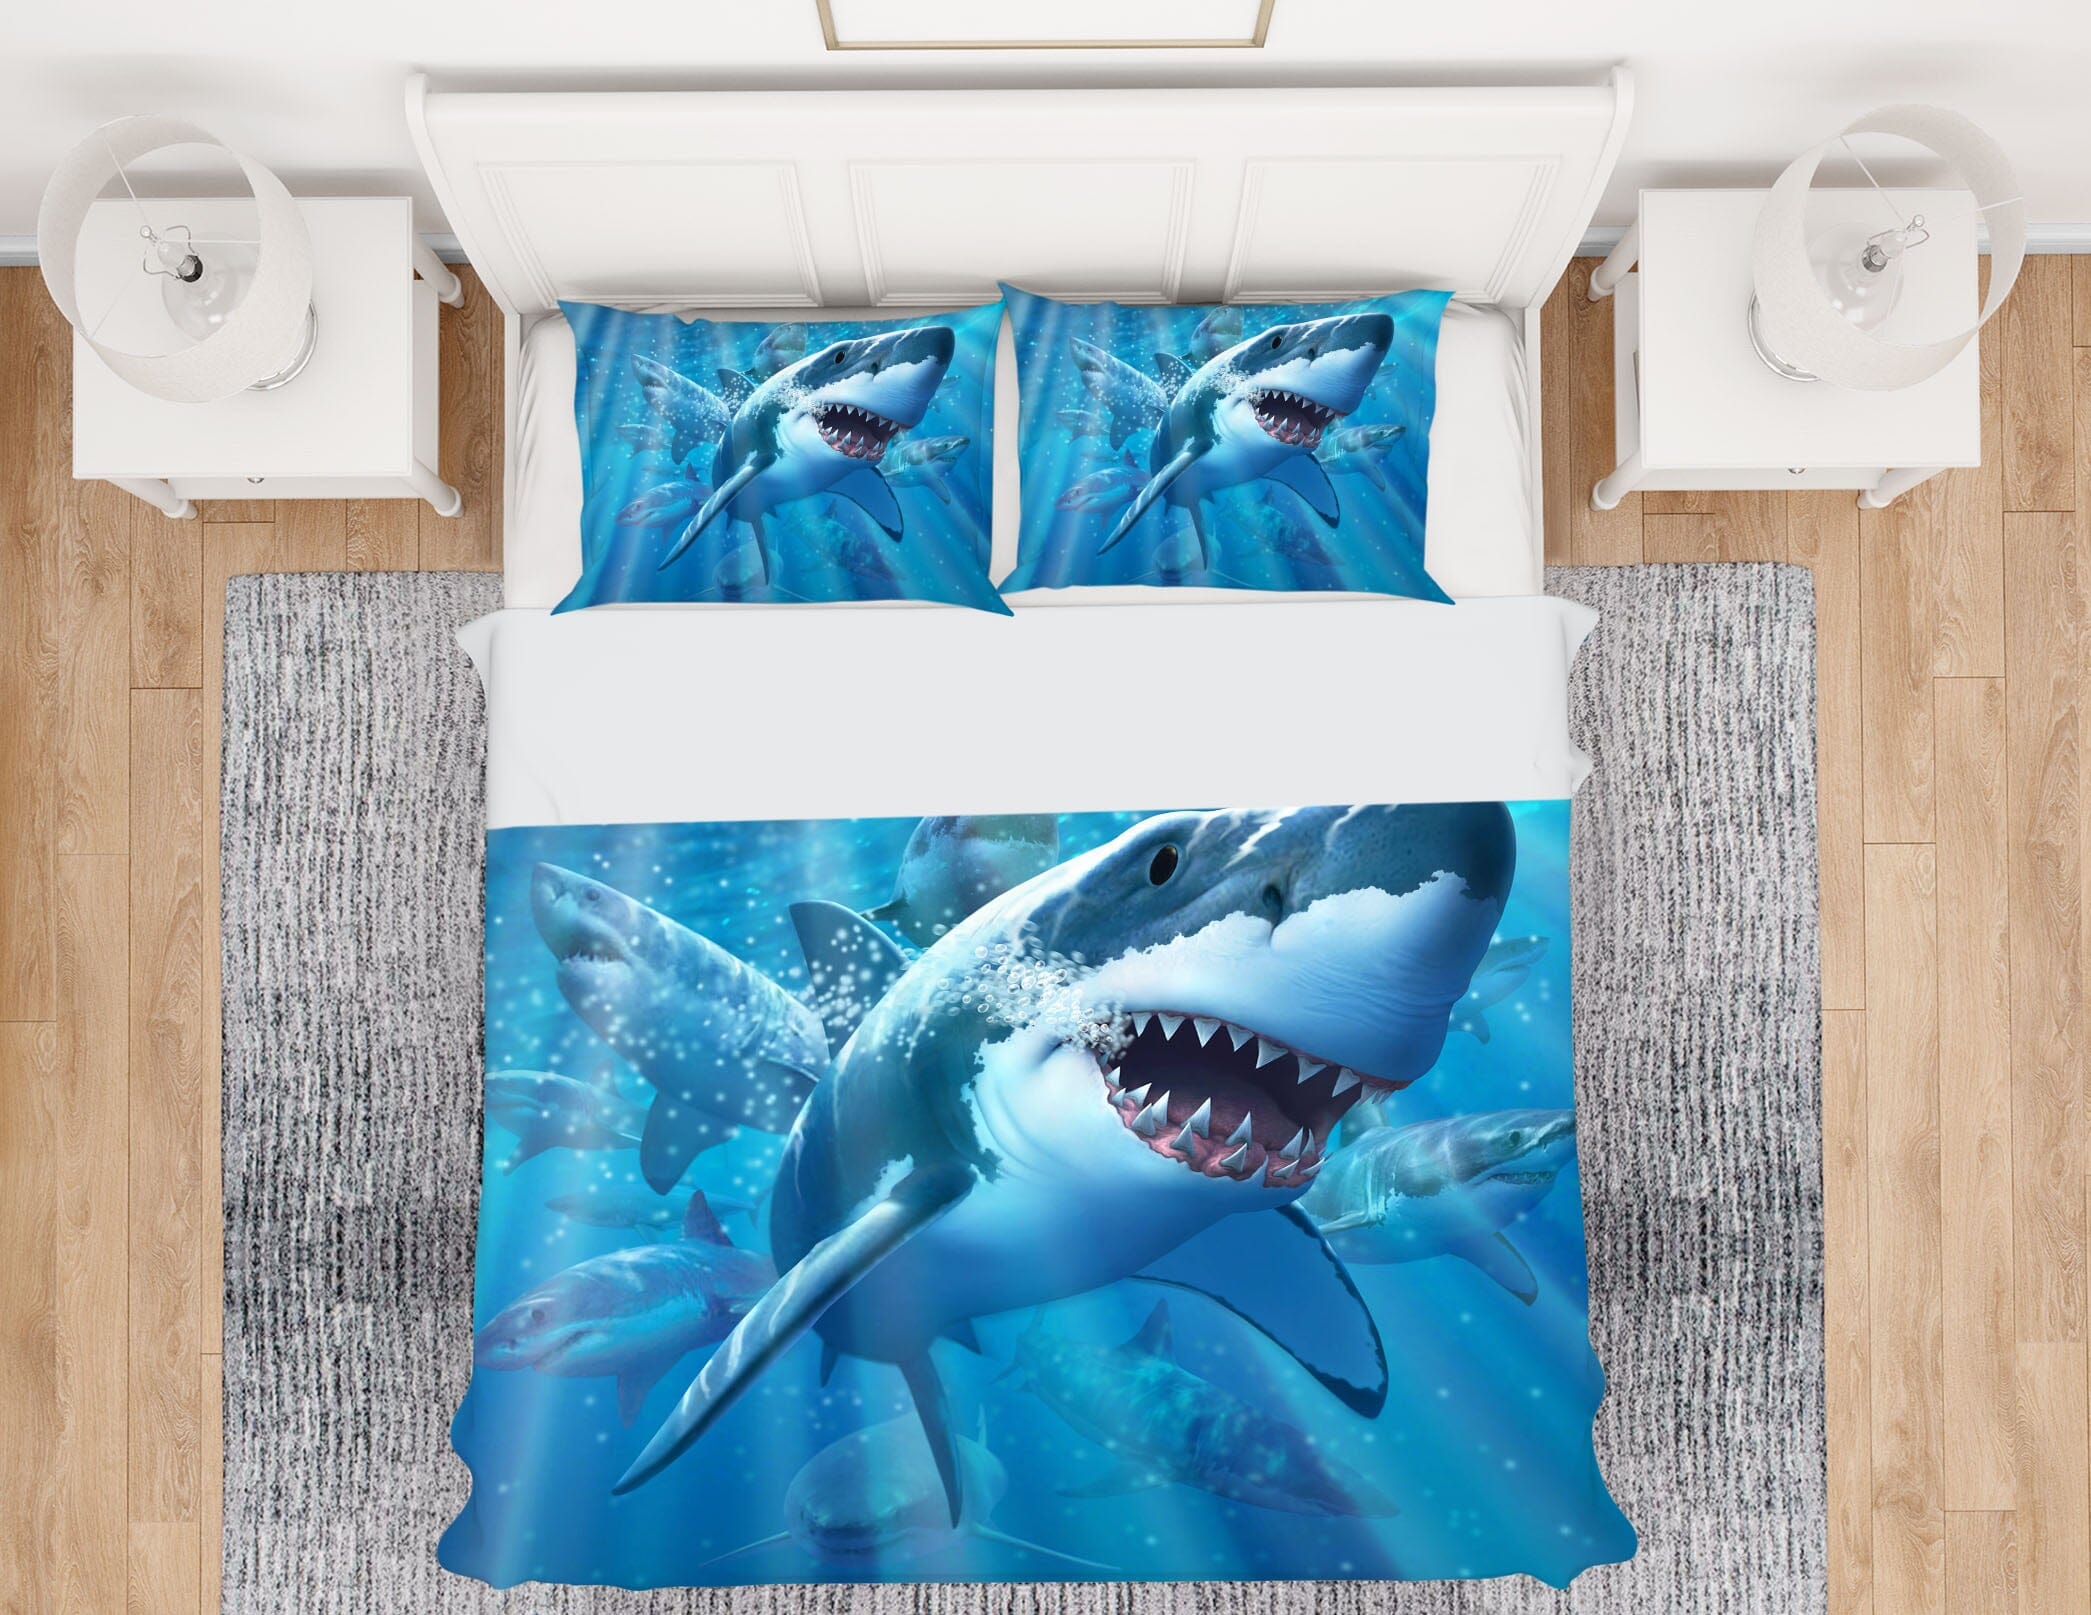 3D Great White Shark 2106 Jerry LoFaro bedding Bed Pillowcases Quilt Quiet Covers AJ Creativity Home 